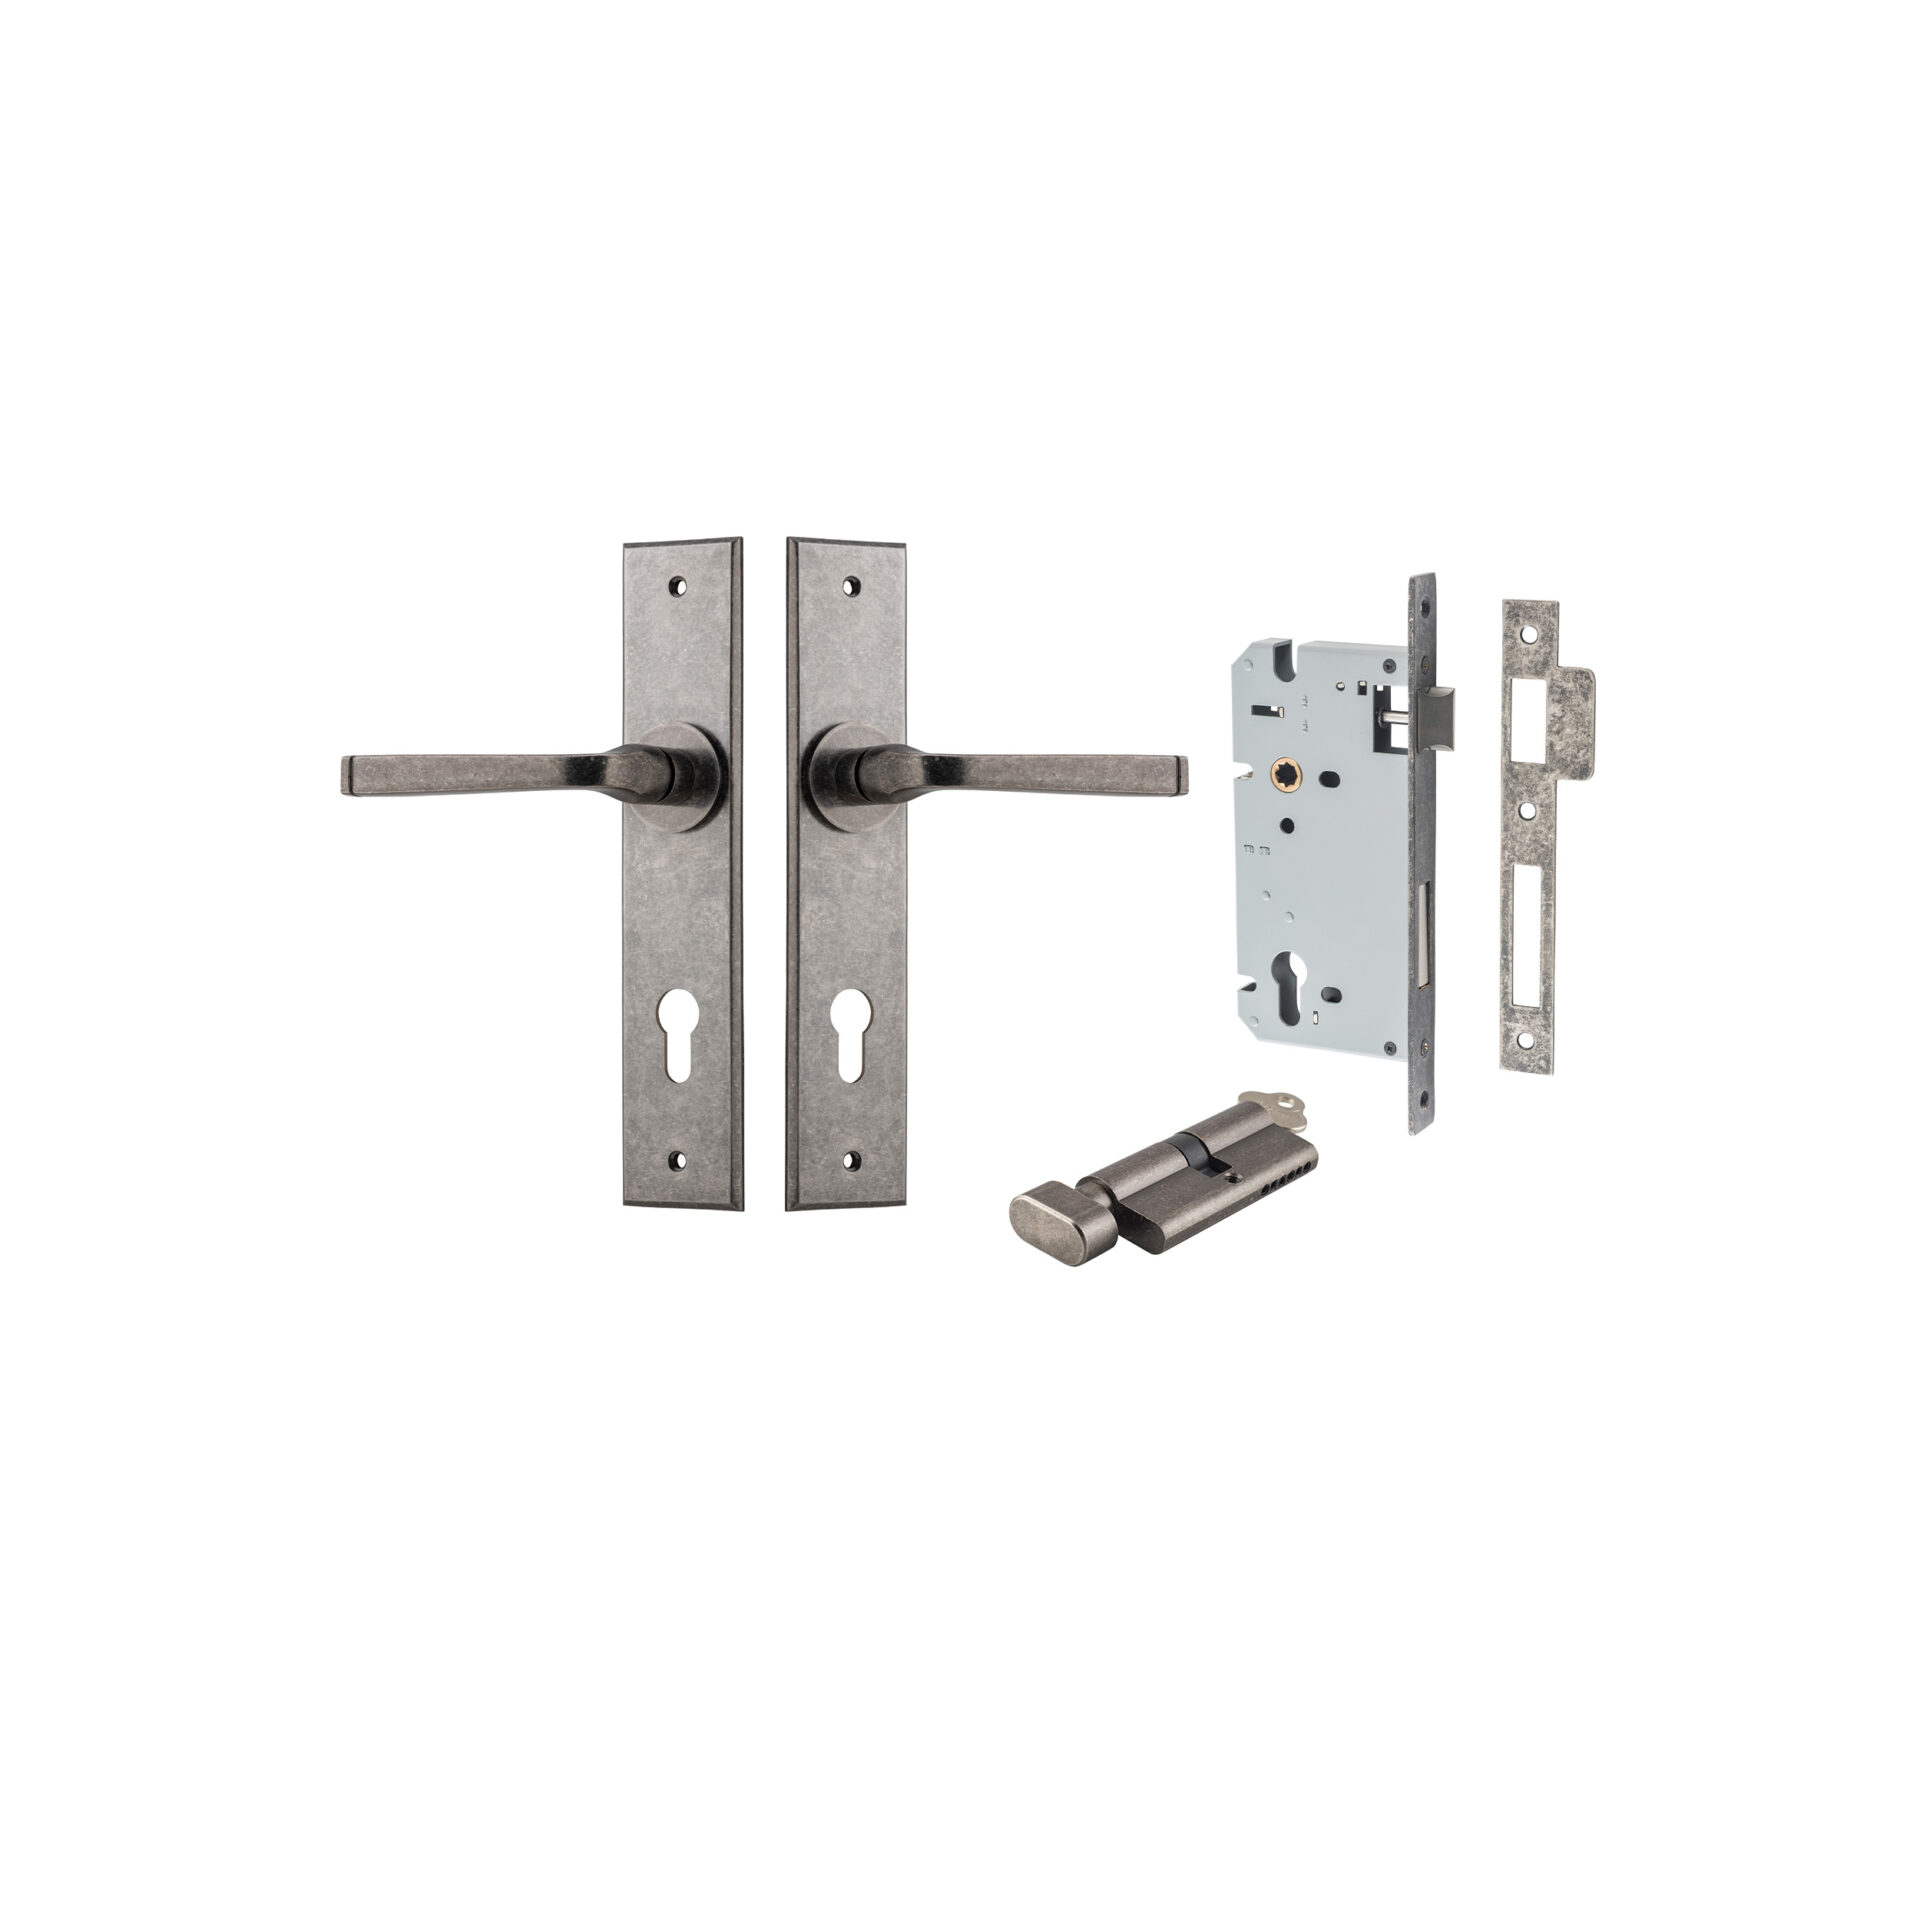 13788KENTR60KT - Annecy Lever - Chamfered Backplate Entrance Kit with High Security Lock - Distressed Nickel - Entrance